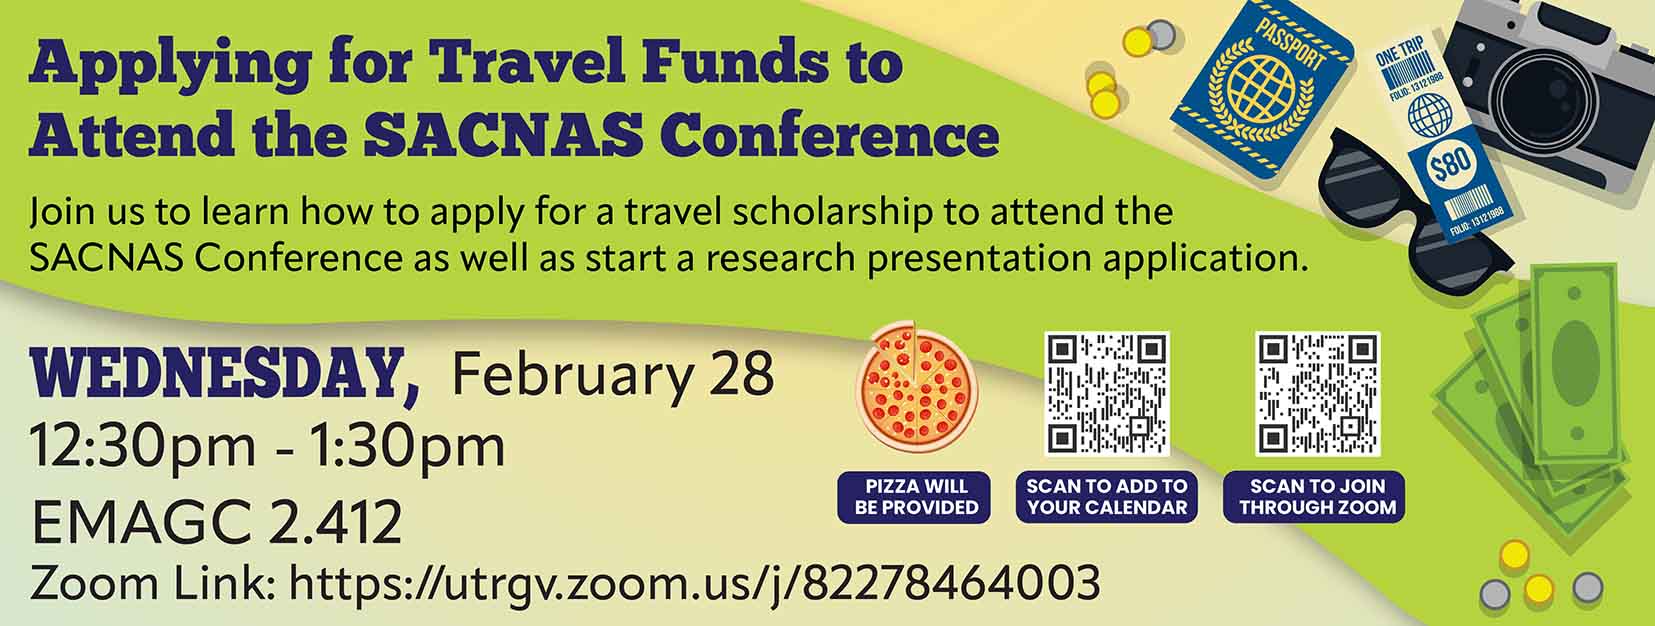 Apply for travel funds for the SACNAS conference